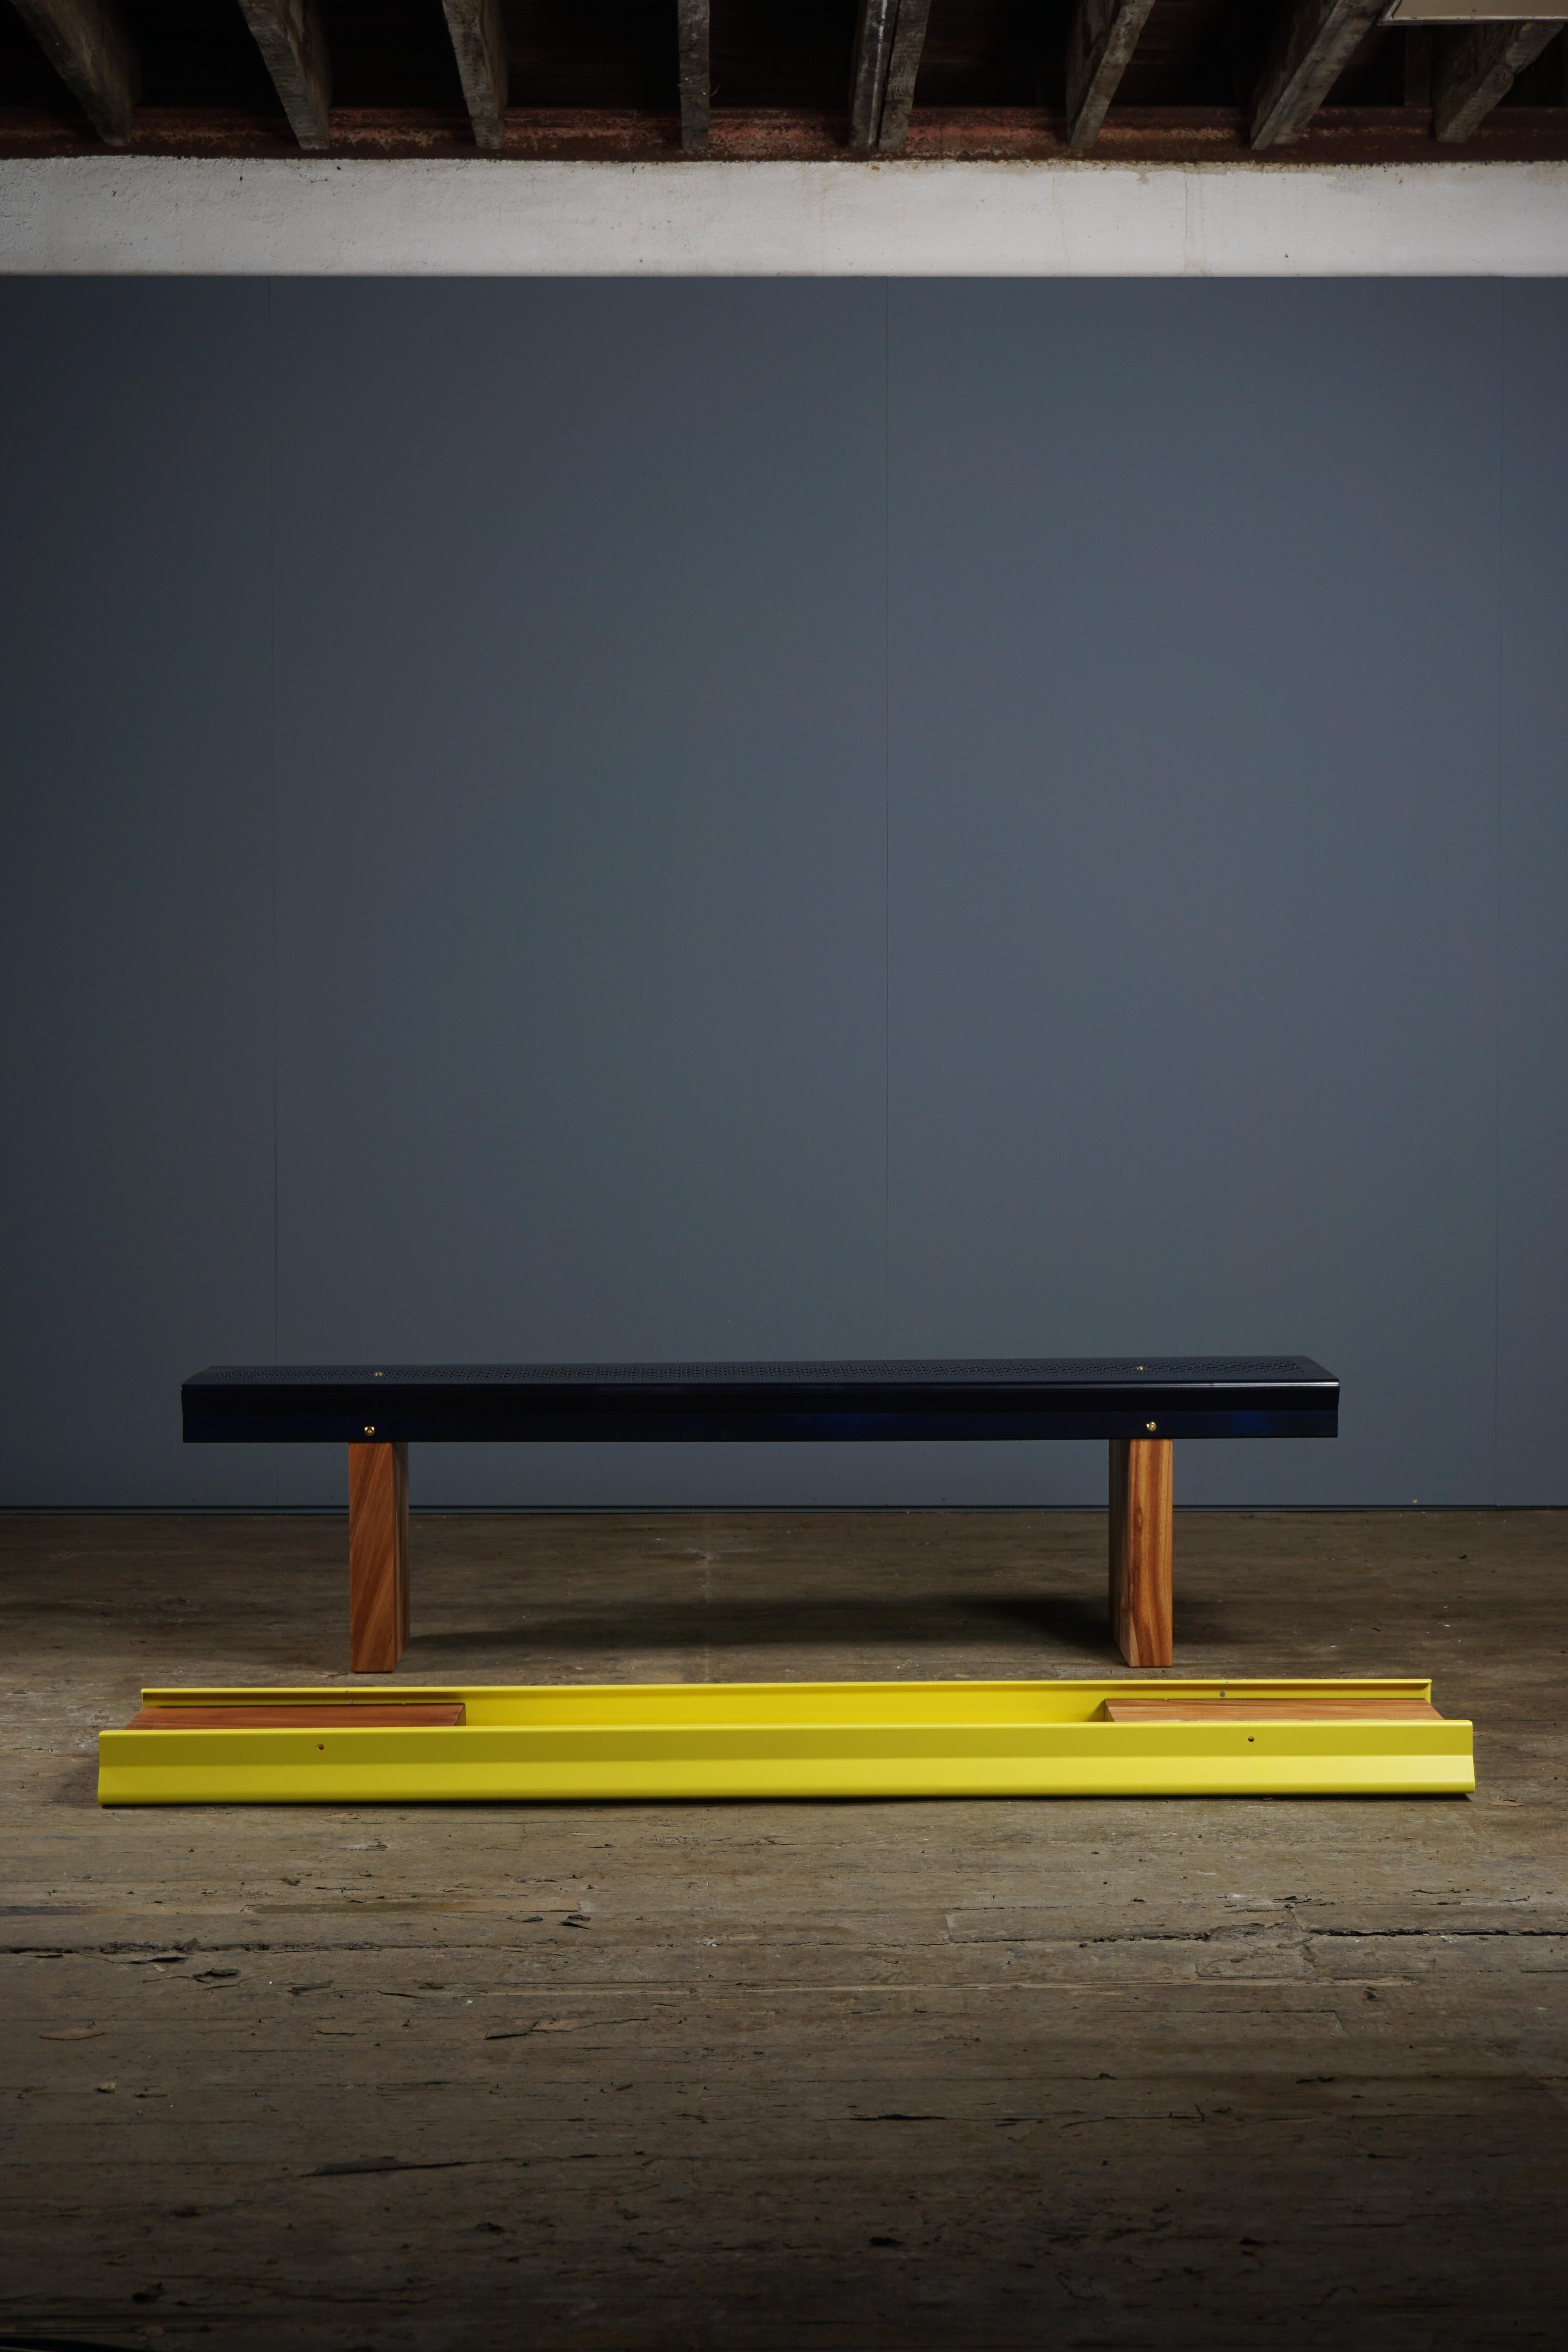 Powder coated in sulfur yellow, the aluminium part is formed in one piece. The perforated metal piece connects to two solid Mahogany legs through blackened steel bolts.
Suitable for indoors only.

Dimensions: 
36cm x 180cm x 45cm 
14